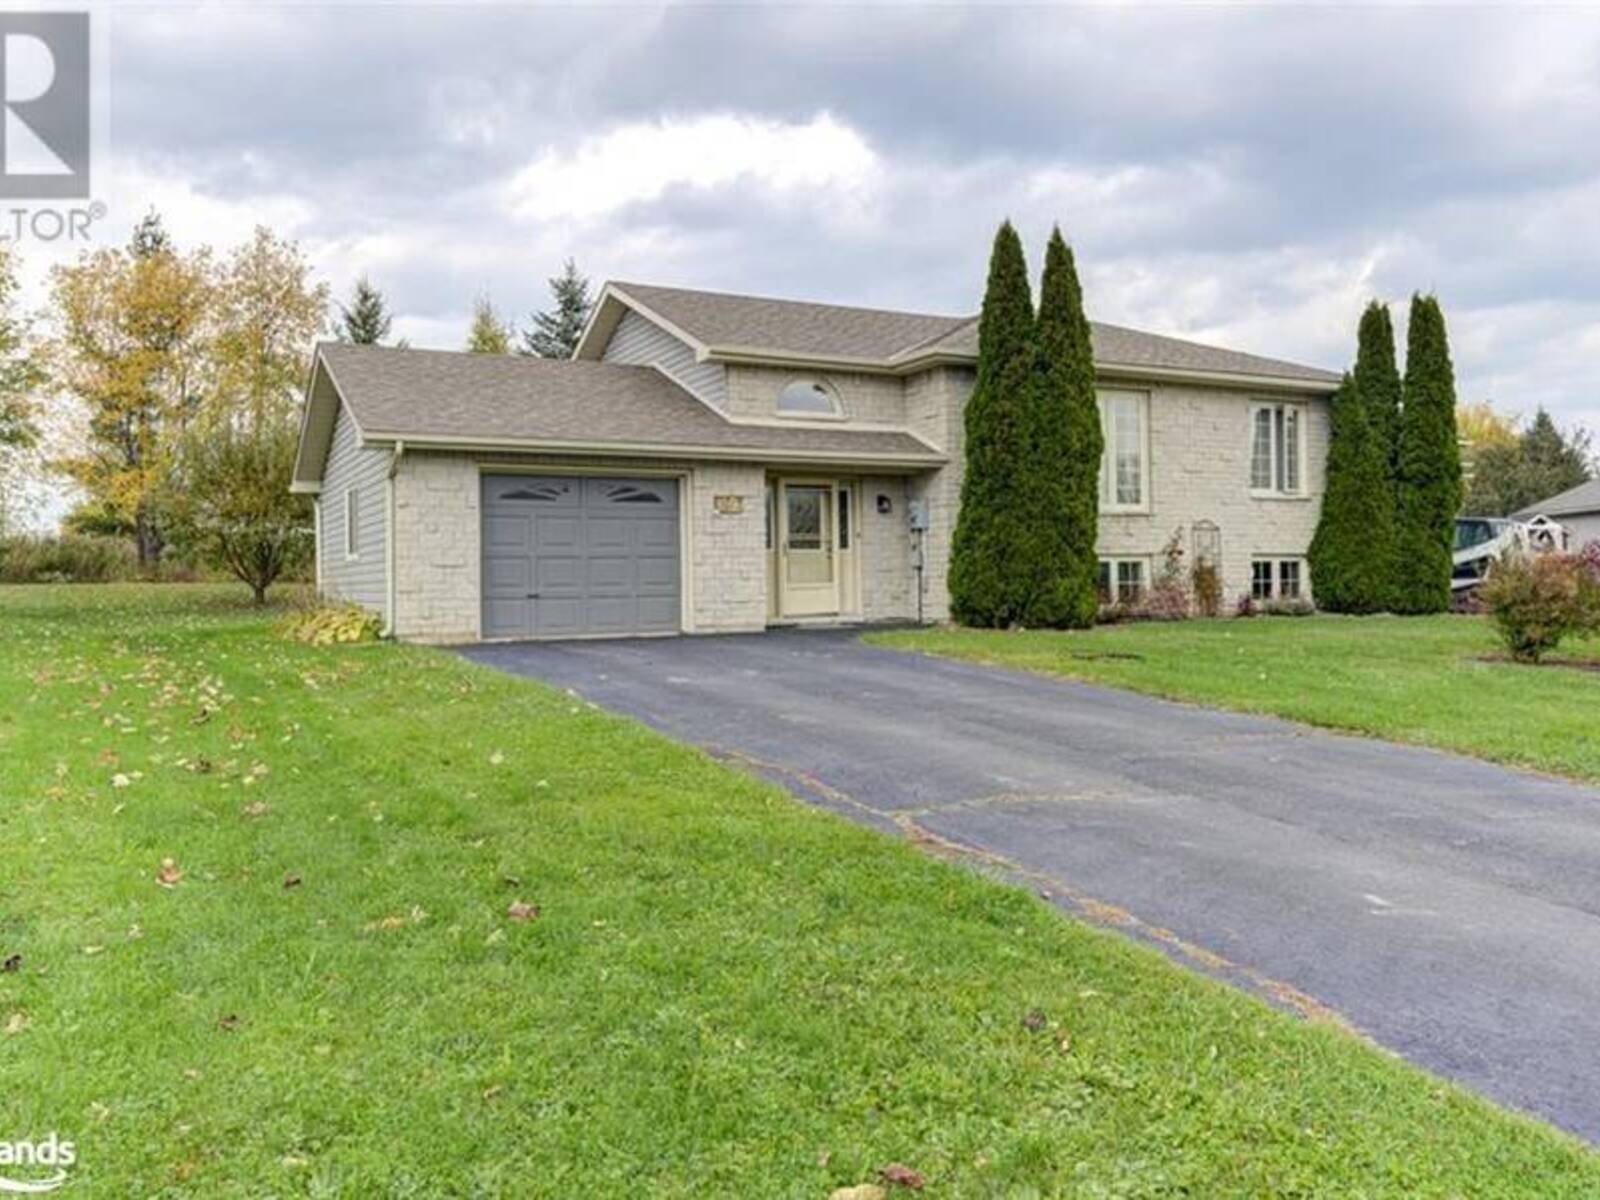 49 COUNTRY Crescent, Meaford, Ontario N4L 1L7